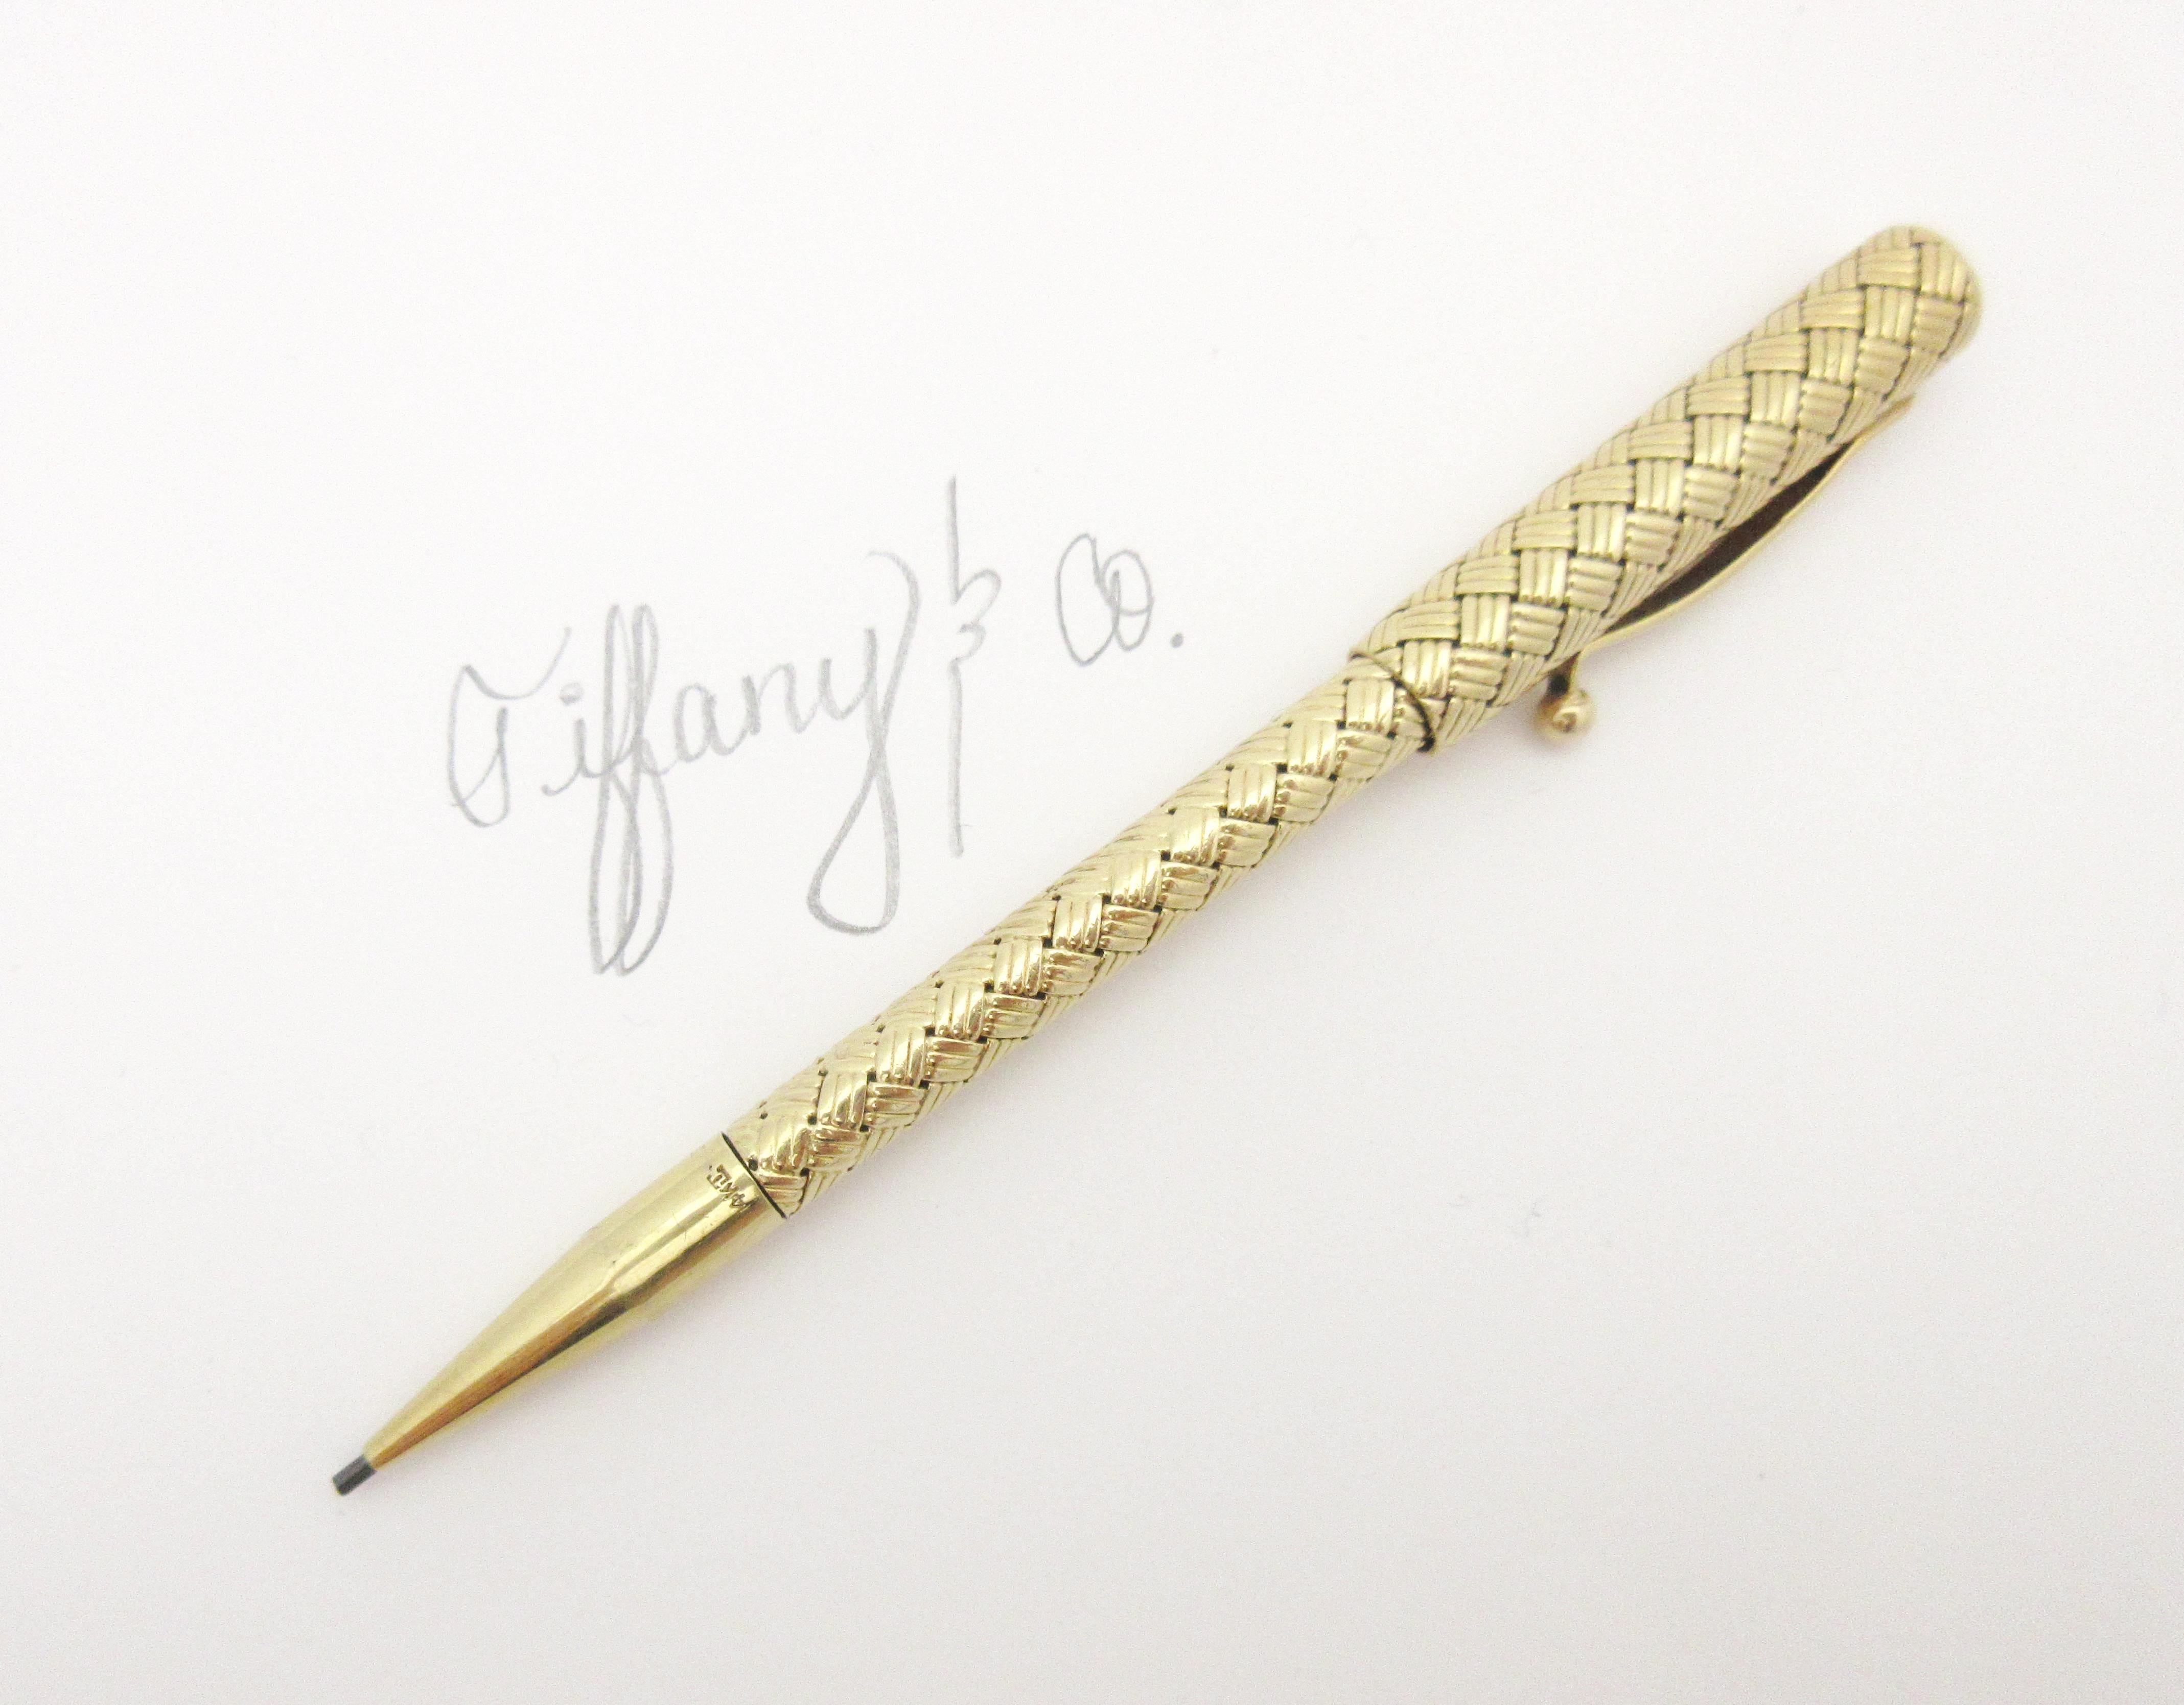 This rare piece is an original from Tiffany & Co. dating to the 1950s.

This solid 14 karat gold writing utensil is a double-ended implement with both a pen and functioning pencil. The piece features a stunning basket weave texture from the body of